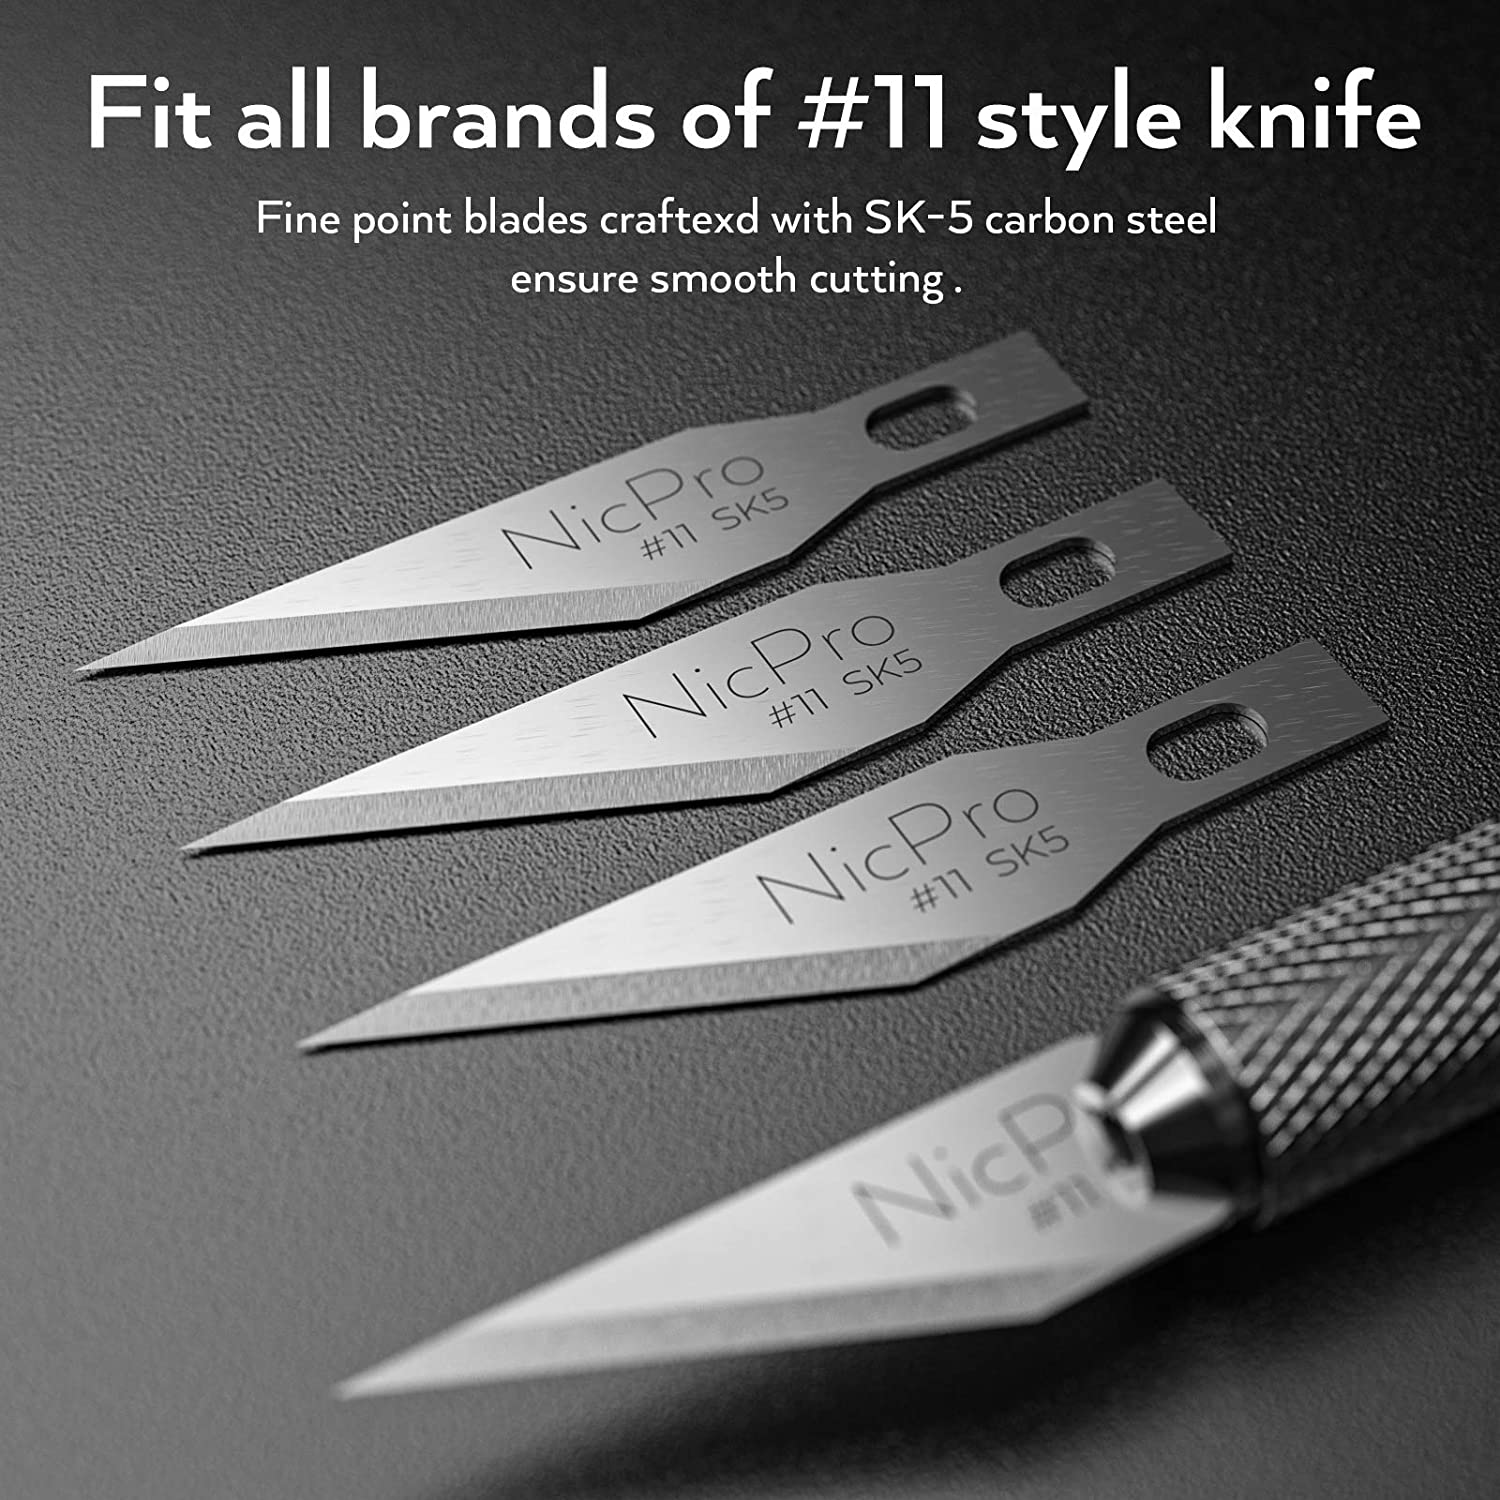 Definite Art and Craft Hobby Knives 13 Piece - Craft Knife Set, Exacto  Knife for Crafting, Cutter, Pen Knife, Razor Knife, Craft Knife, Exacto  Knife Blades, Hobby Knife, Leather Cutting Tool 